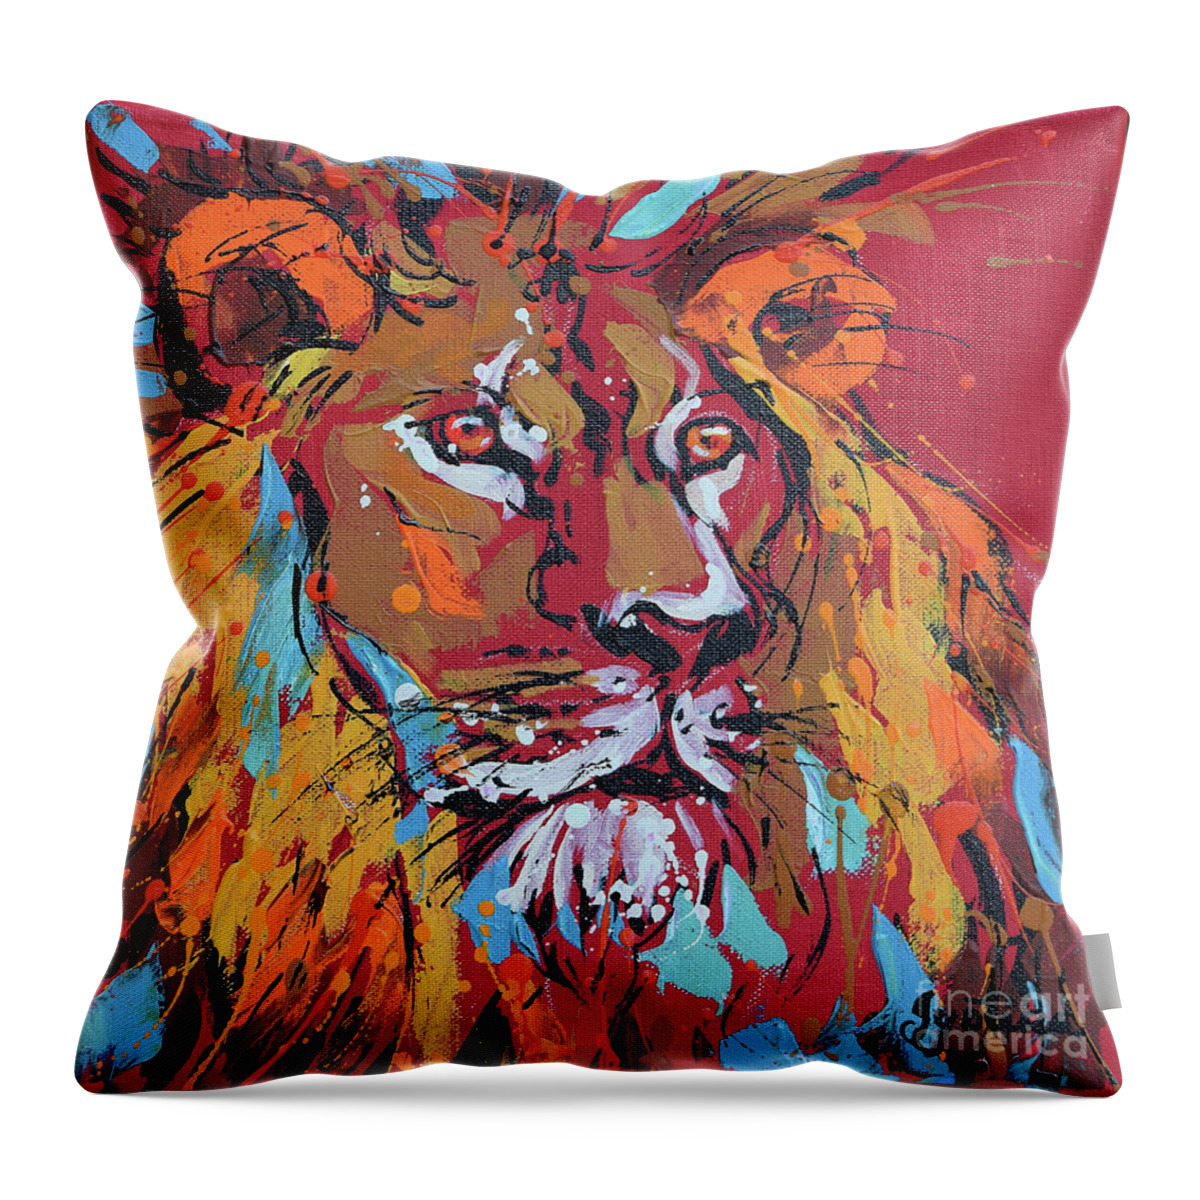  Throw Pillow featuring the painting Lion by Jyotika Shroff